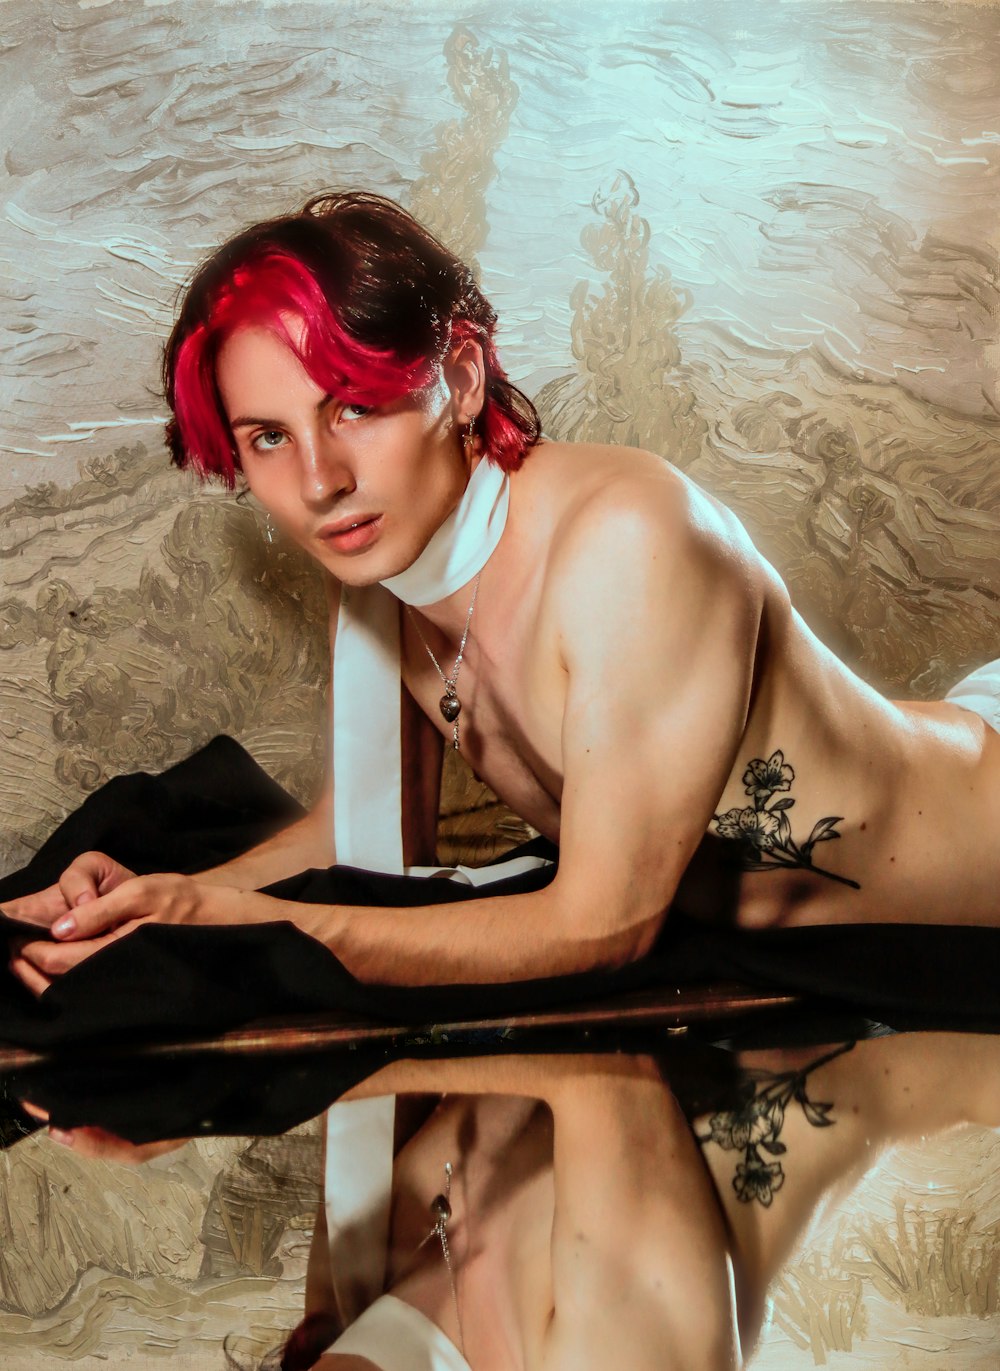 a shirtless man with red hair sitting on a bed